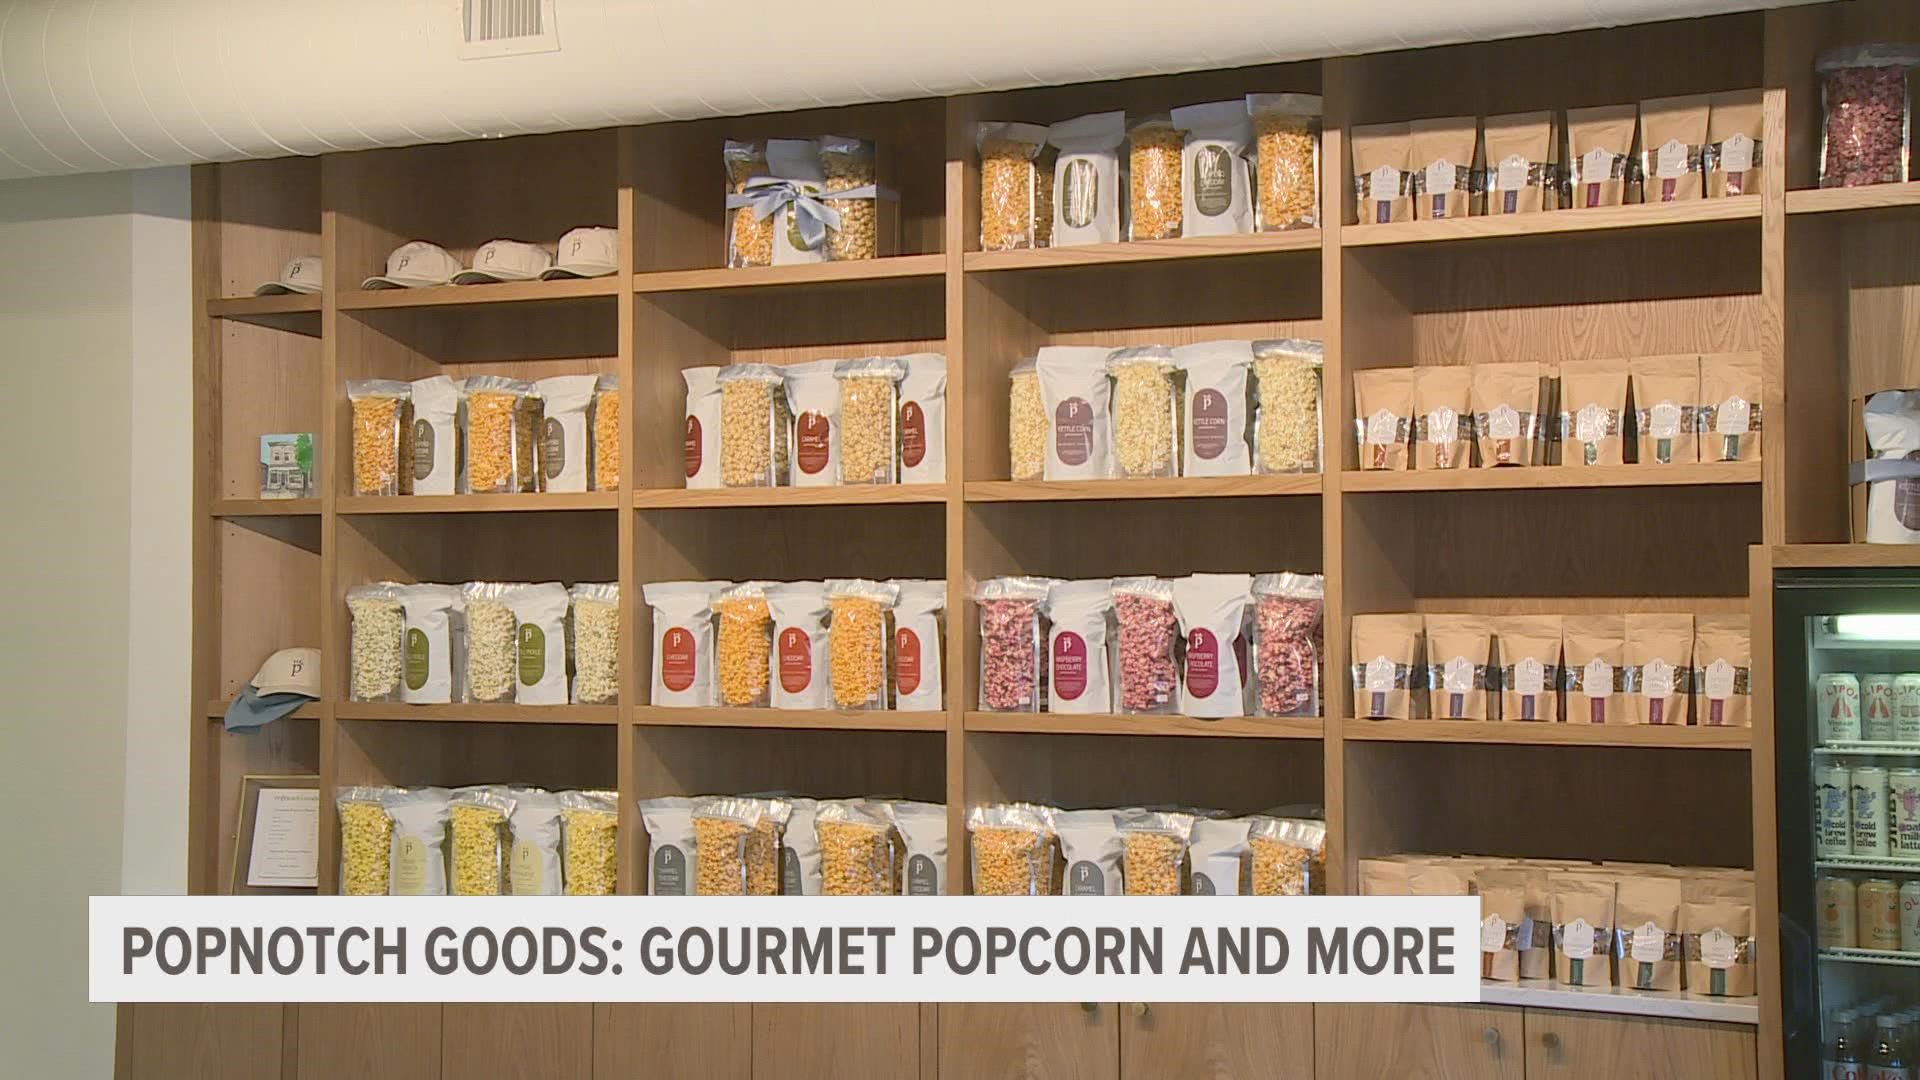 A new business offering gourmet popcorn and other delicious snacks is now open on Wealthy Street.